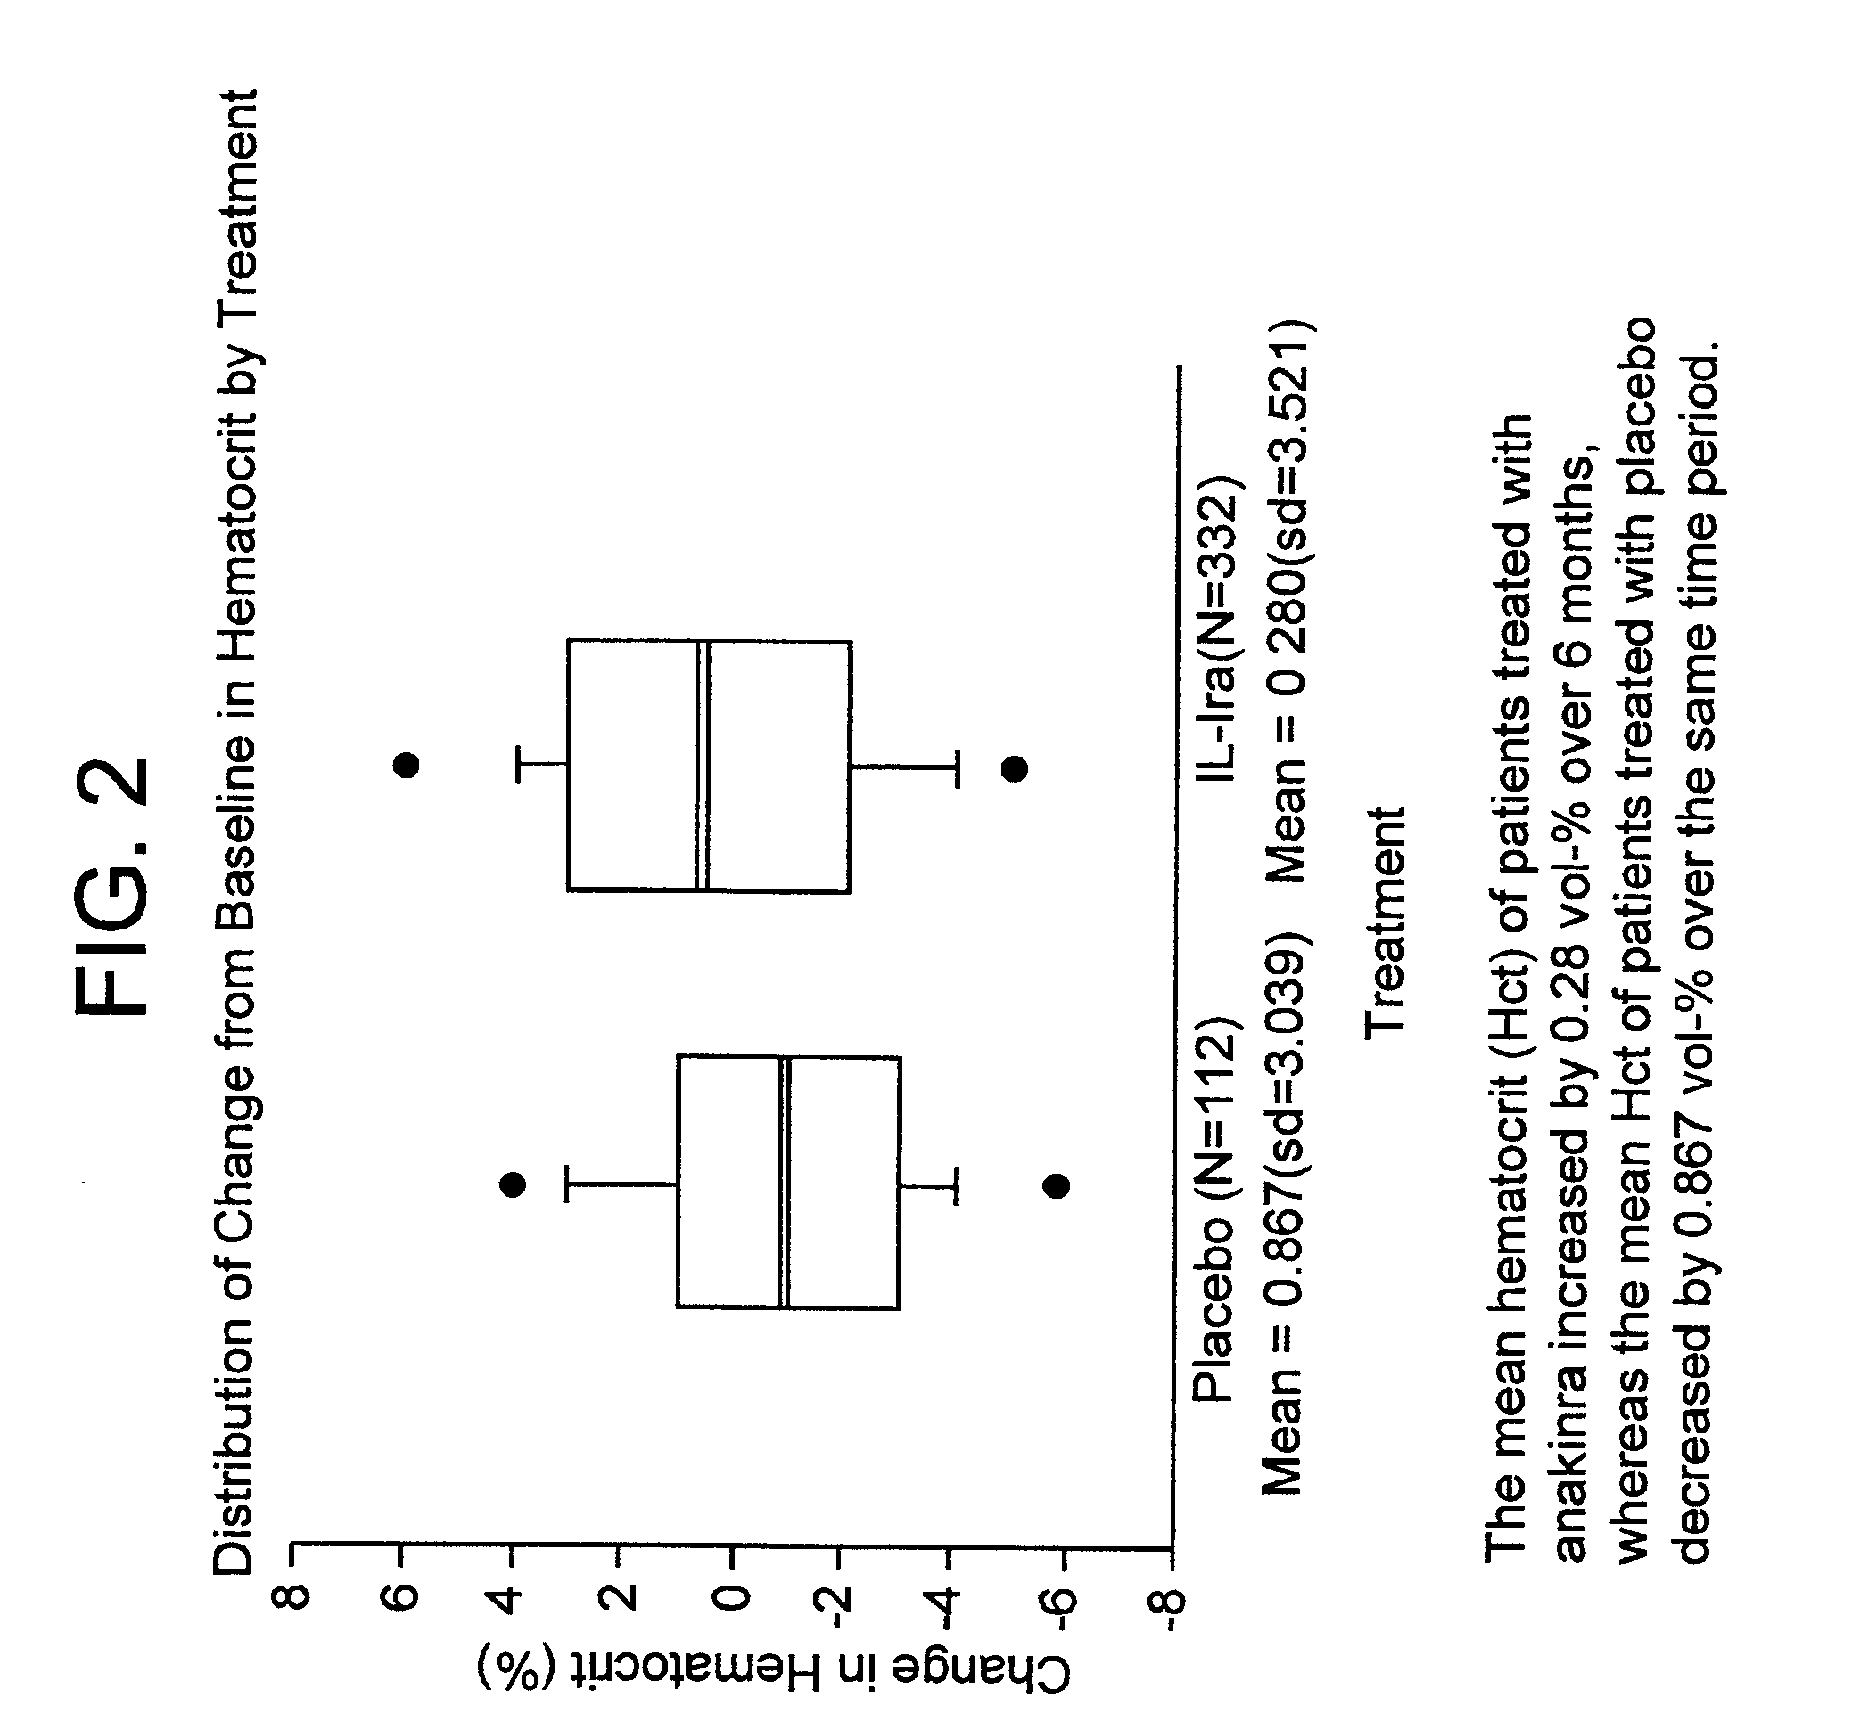 Method of treating anemia by administering IL-1ra